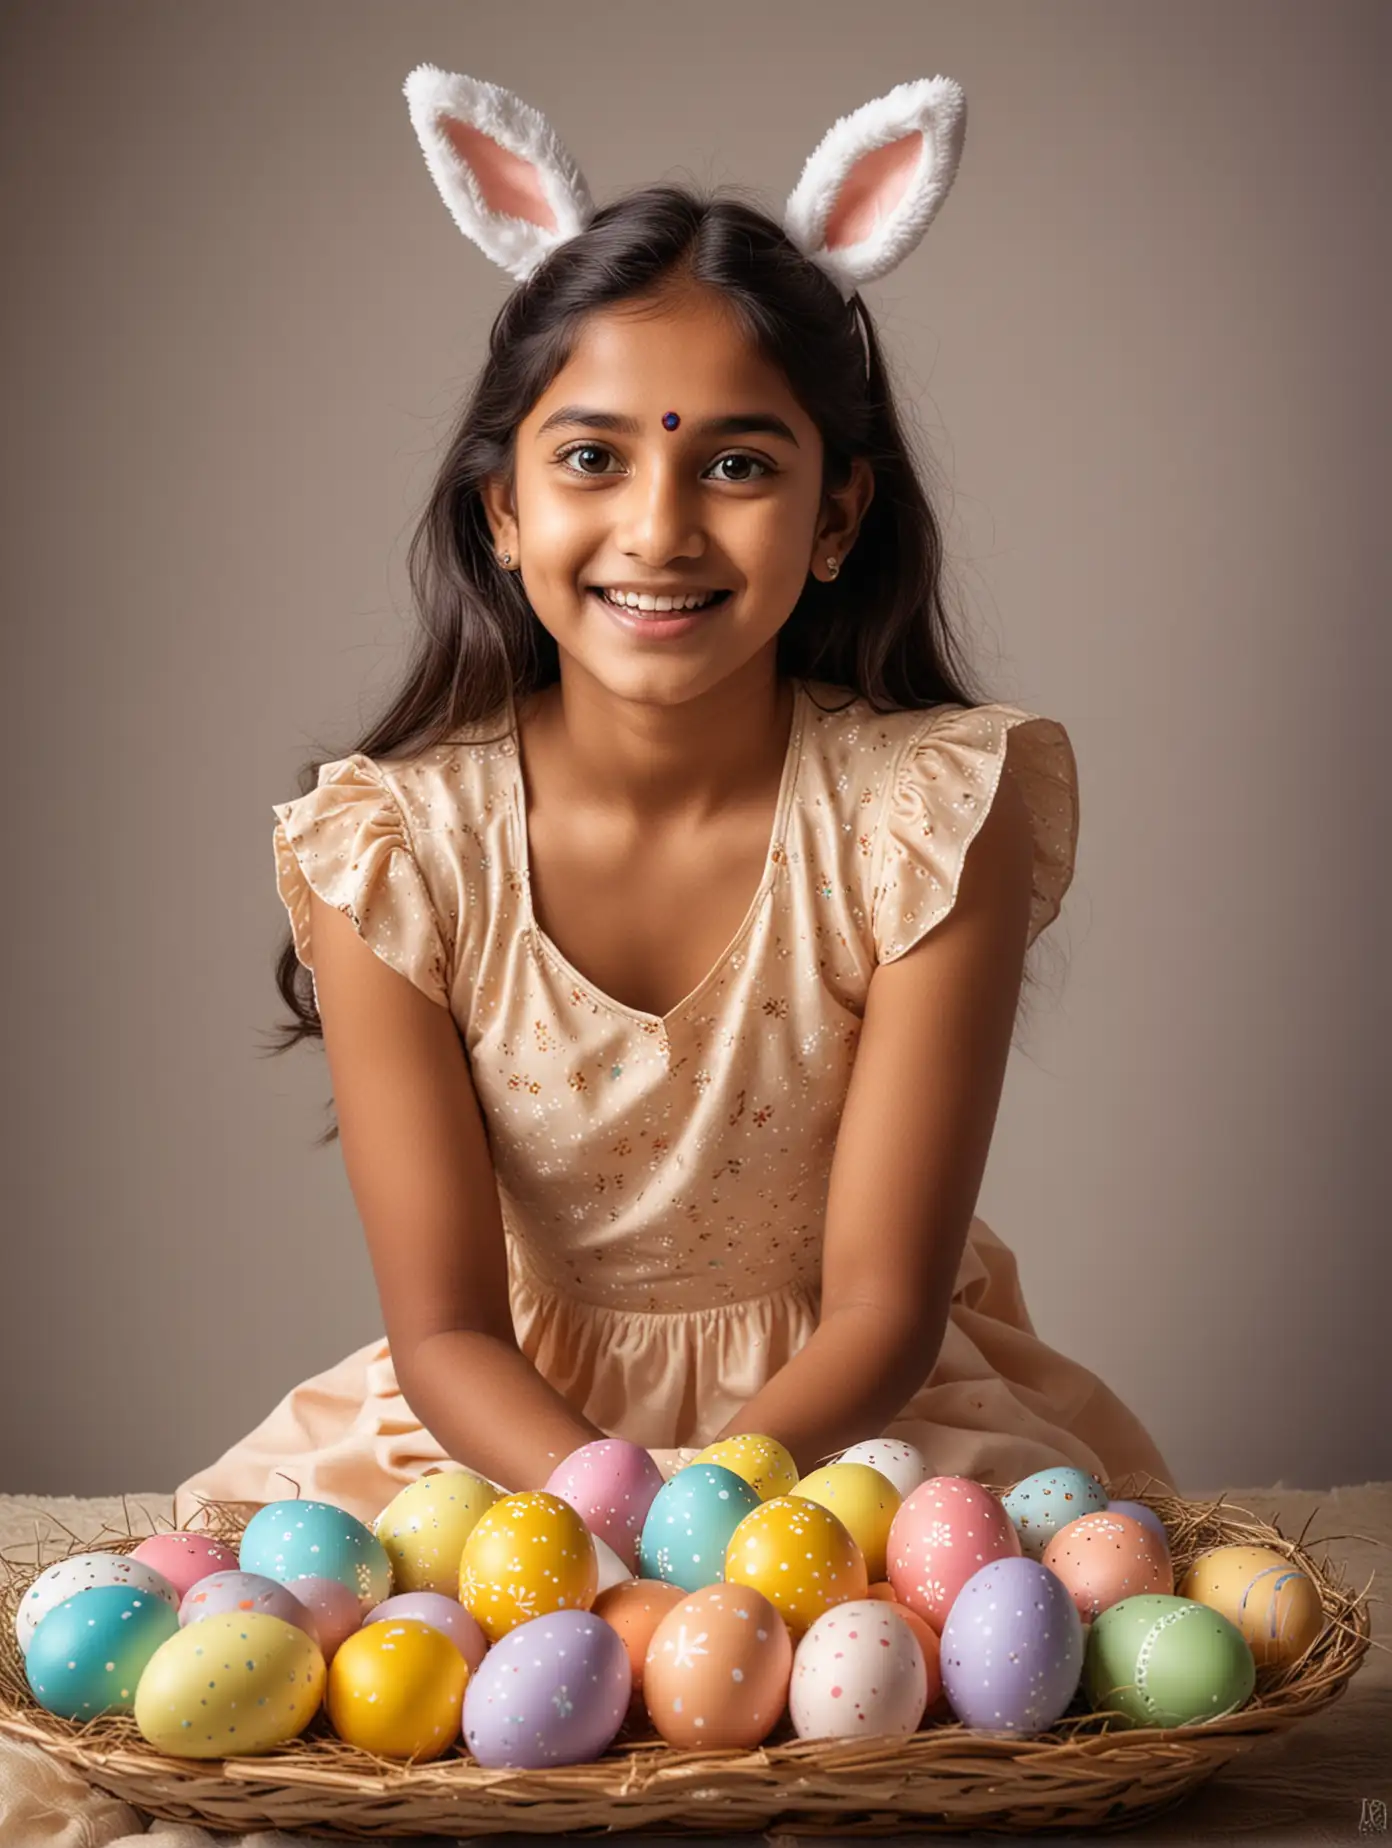 Indian Girl Celebrating Easter with Festive Joy and Professional Photography